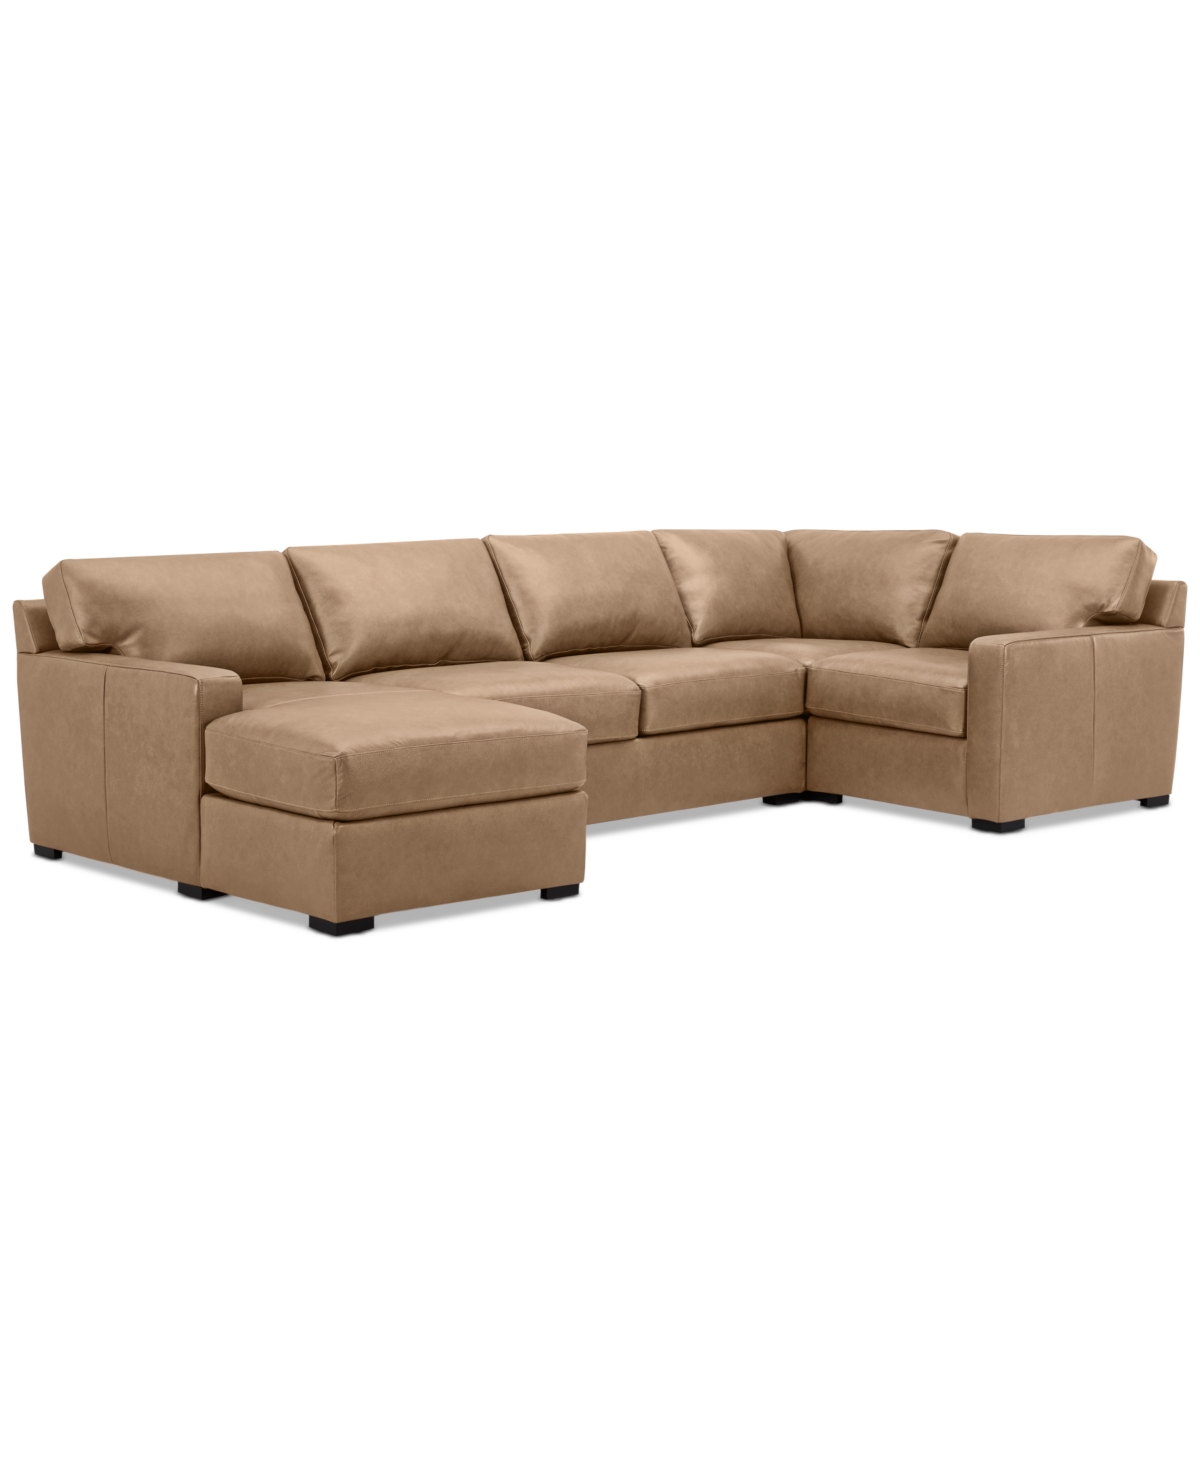 Macy's Radley 136" 4-pc. Leather Square Corner Modular Chaise Sectional, Created For  In Light Natural